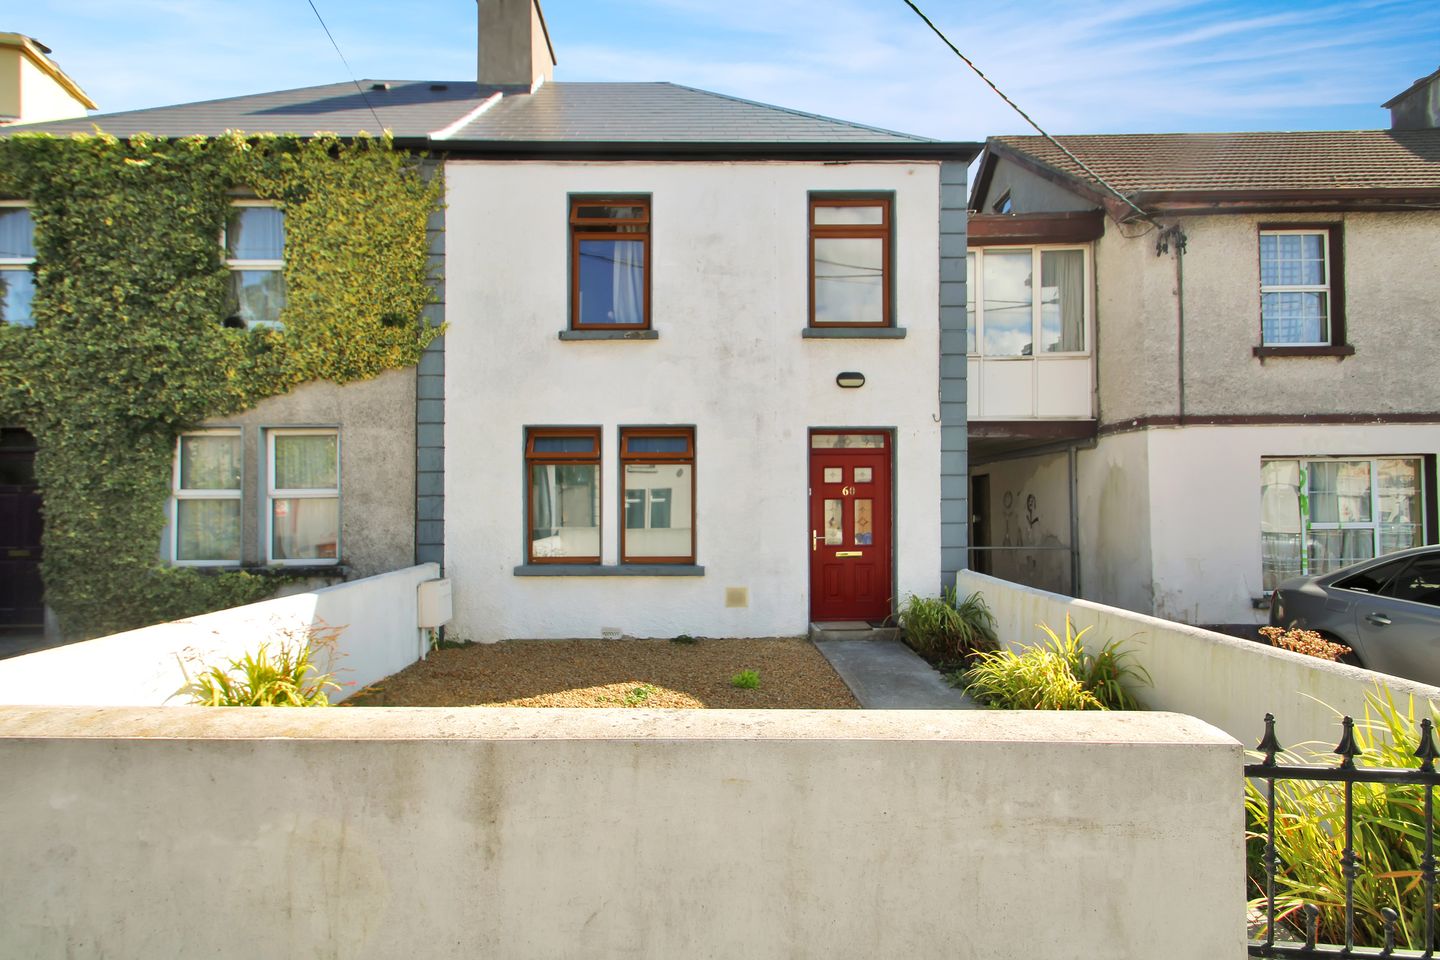 60 Newcastle Road, Newcastle, Co. Galway, H91ECD0